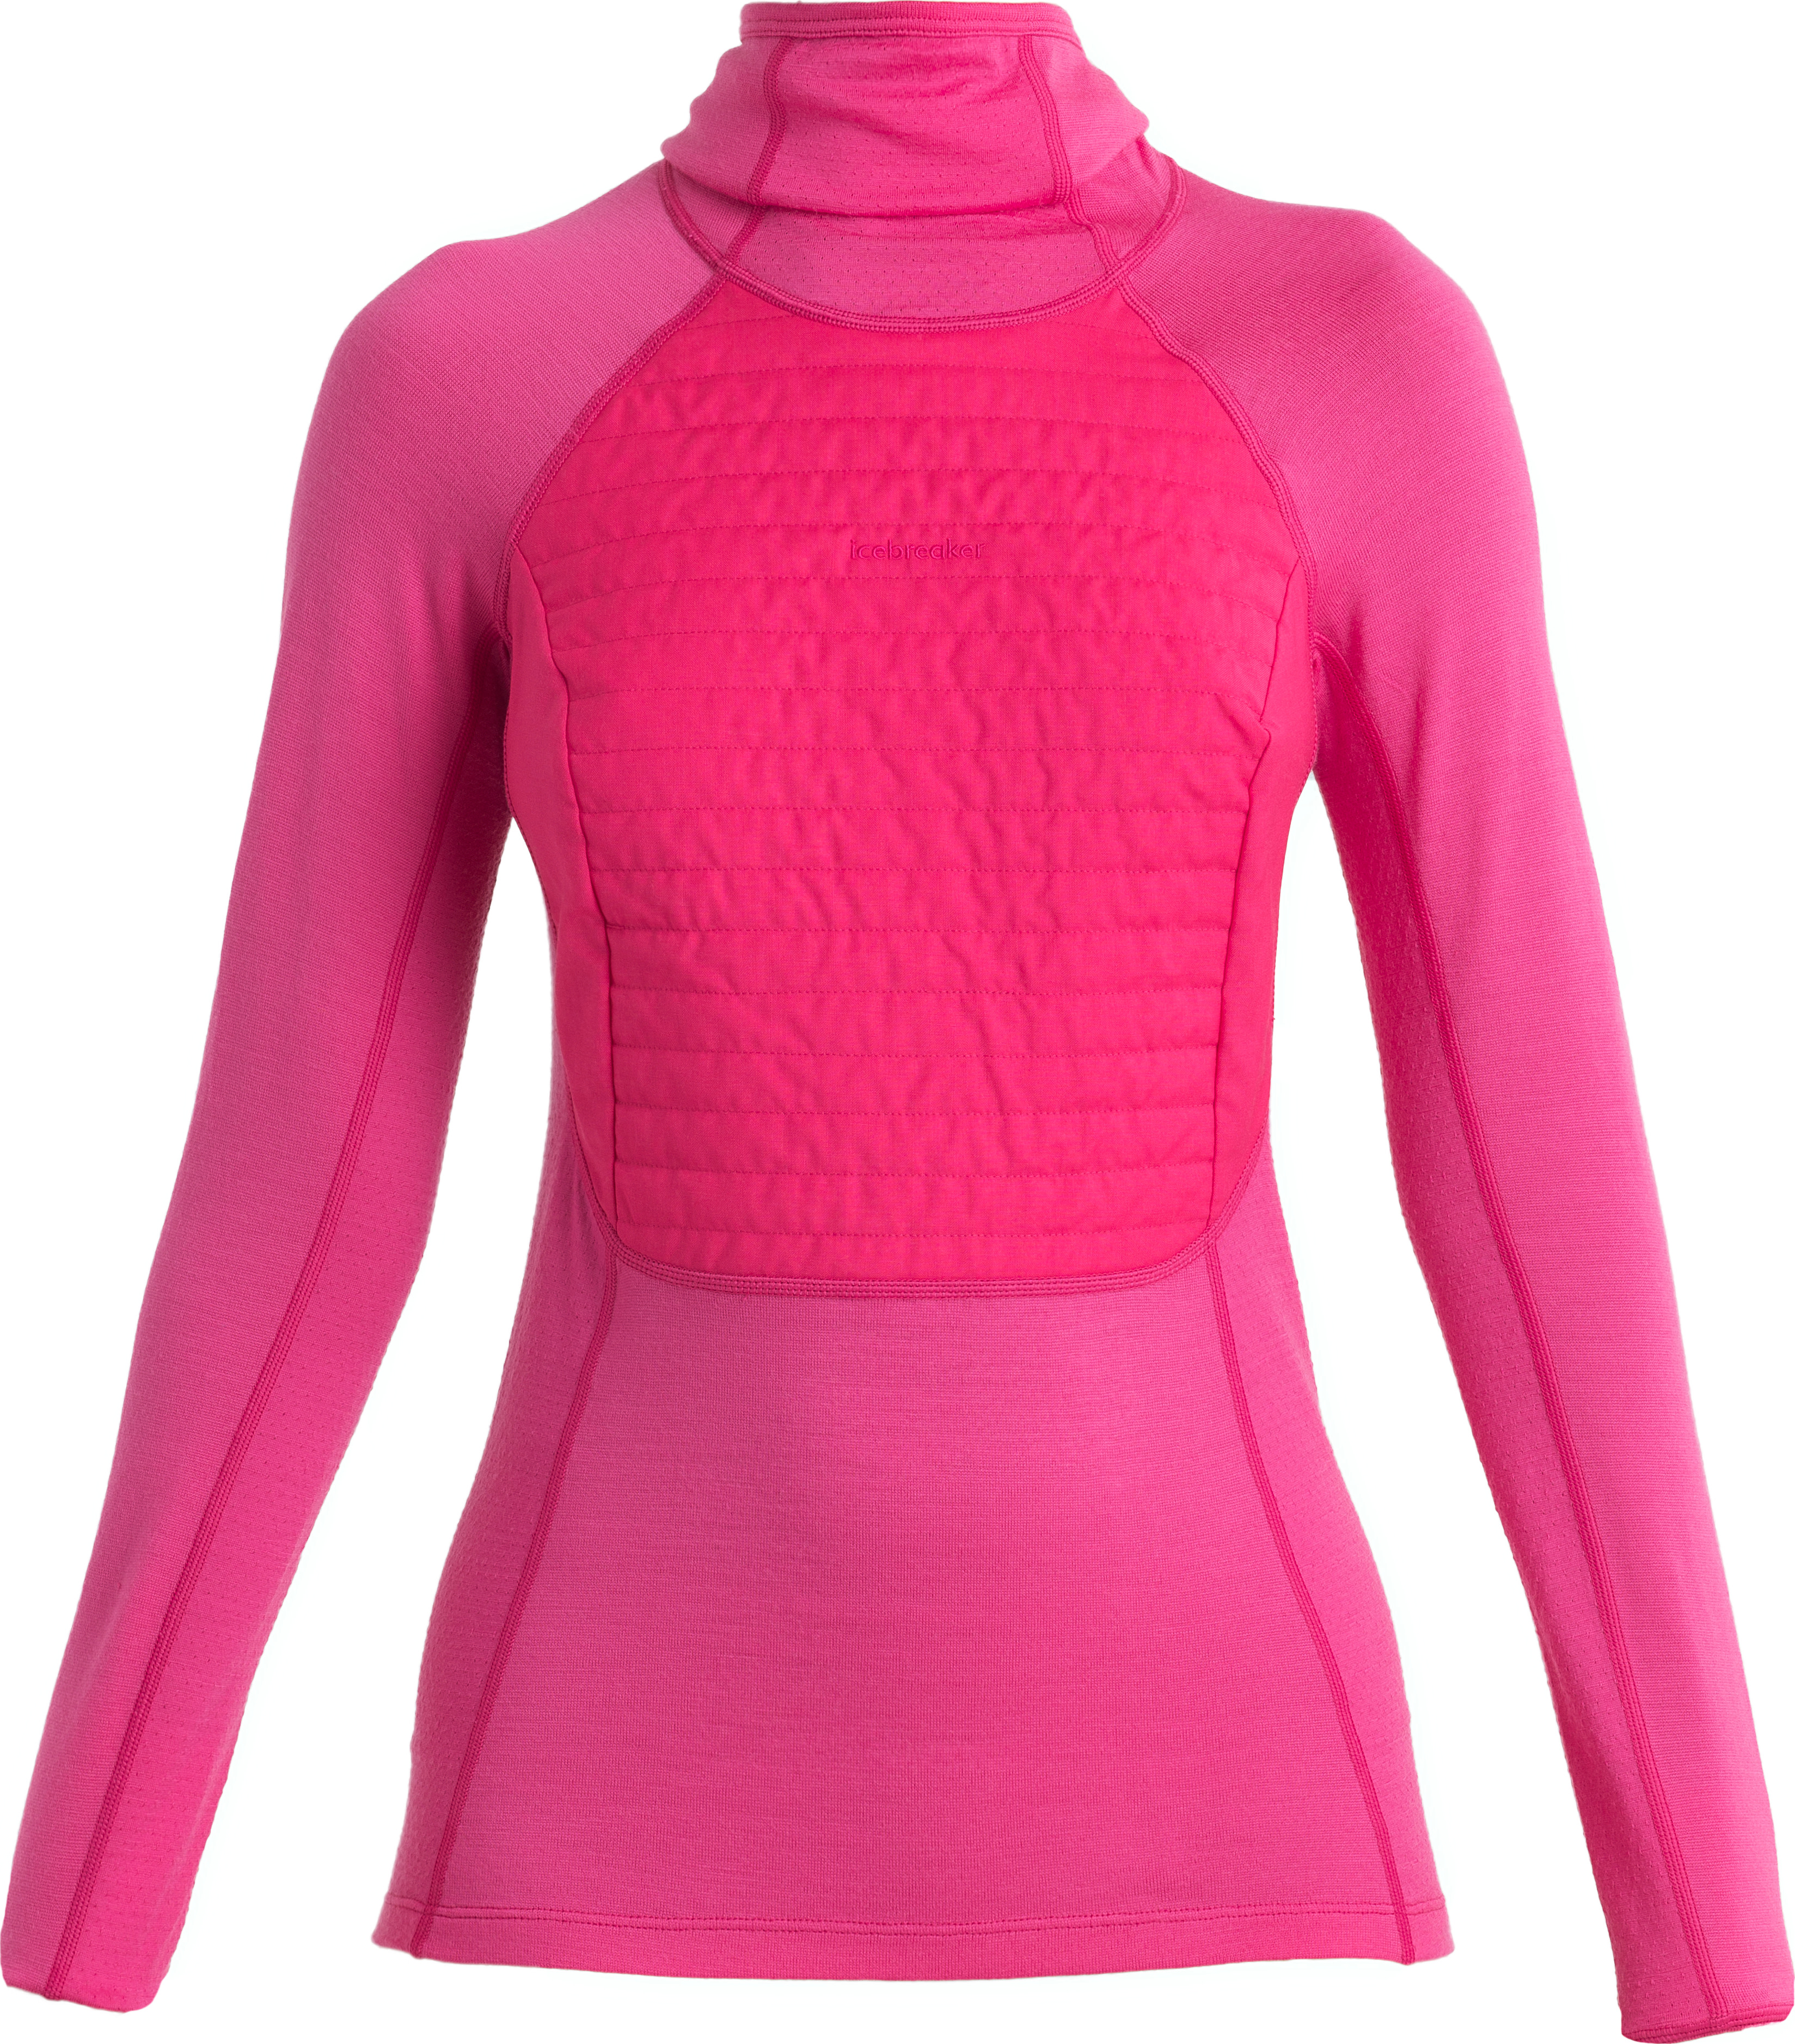 Women’s Zoneknit Insulated Long Sleeve Hoodie Tempo